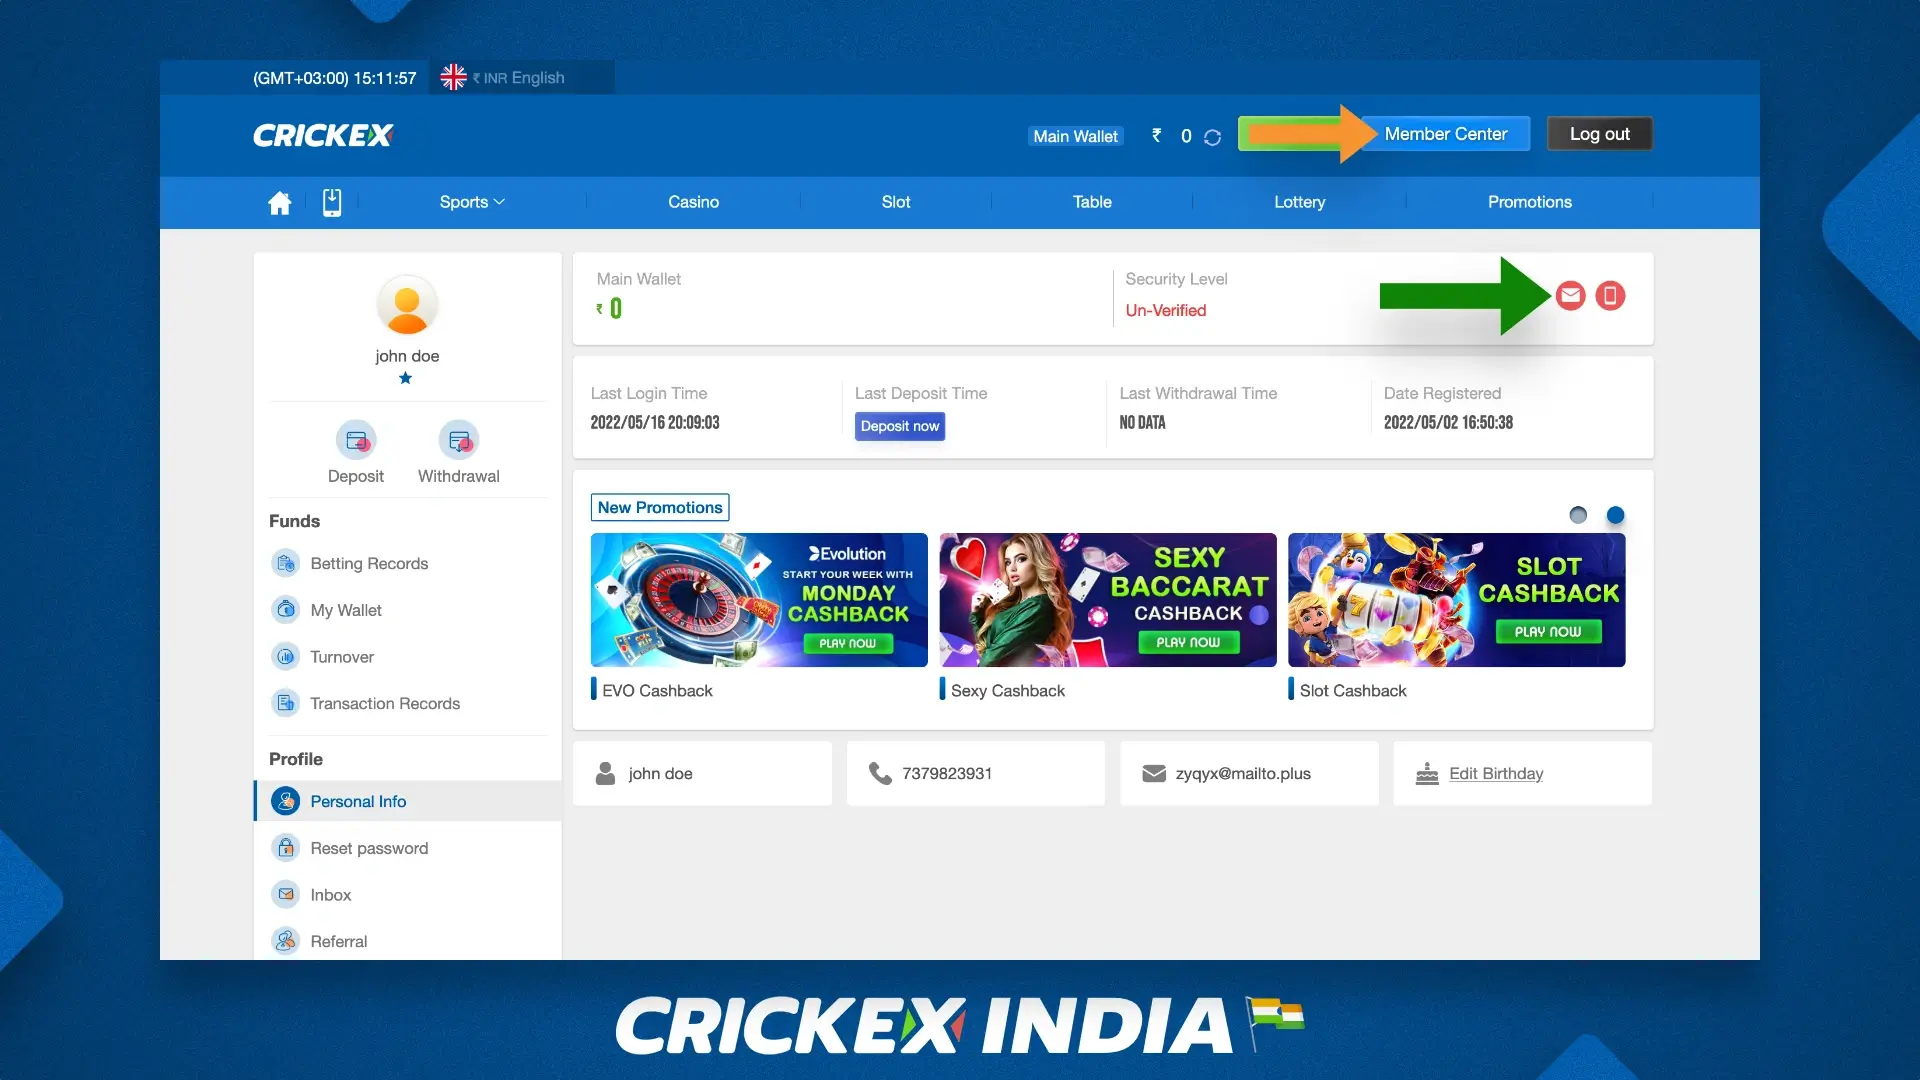 How to verify the account at Crickex in India